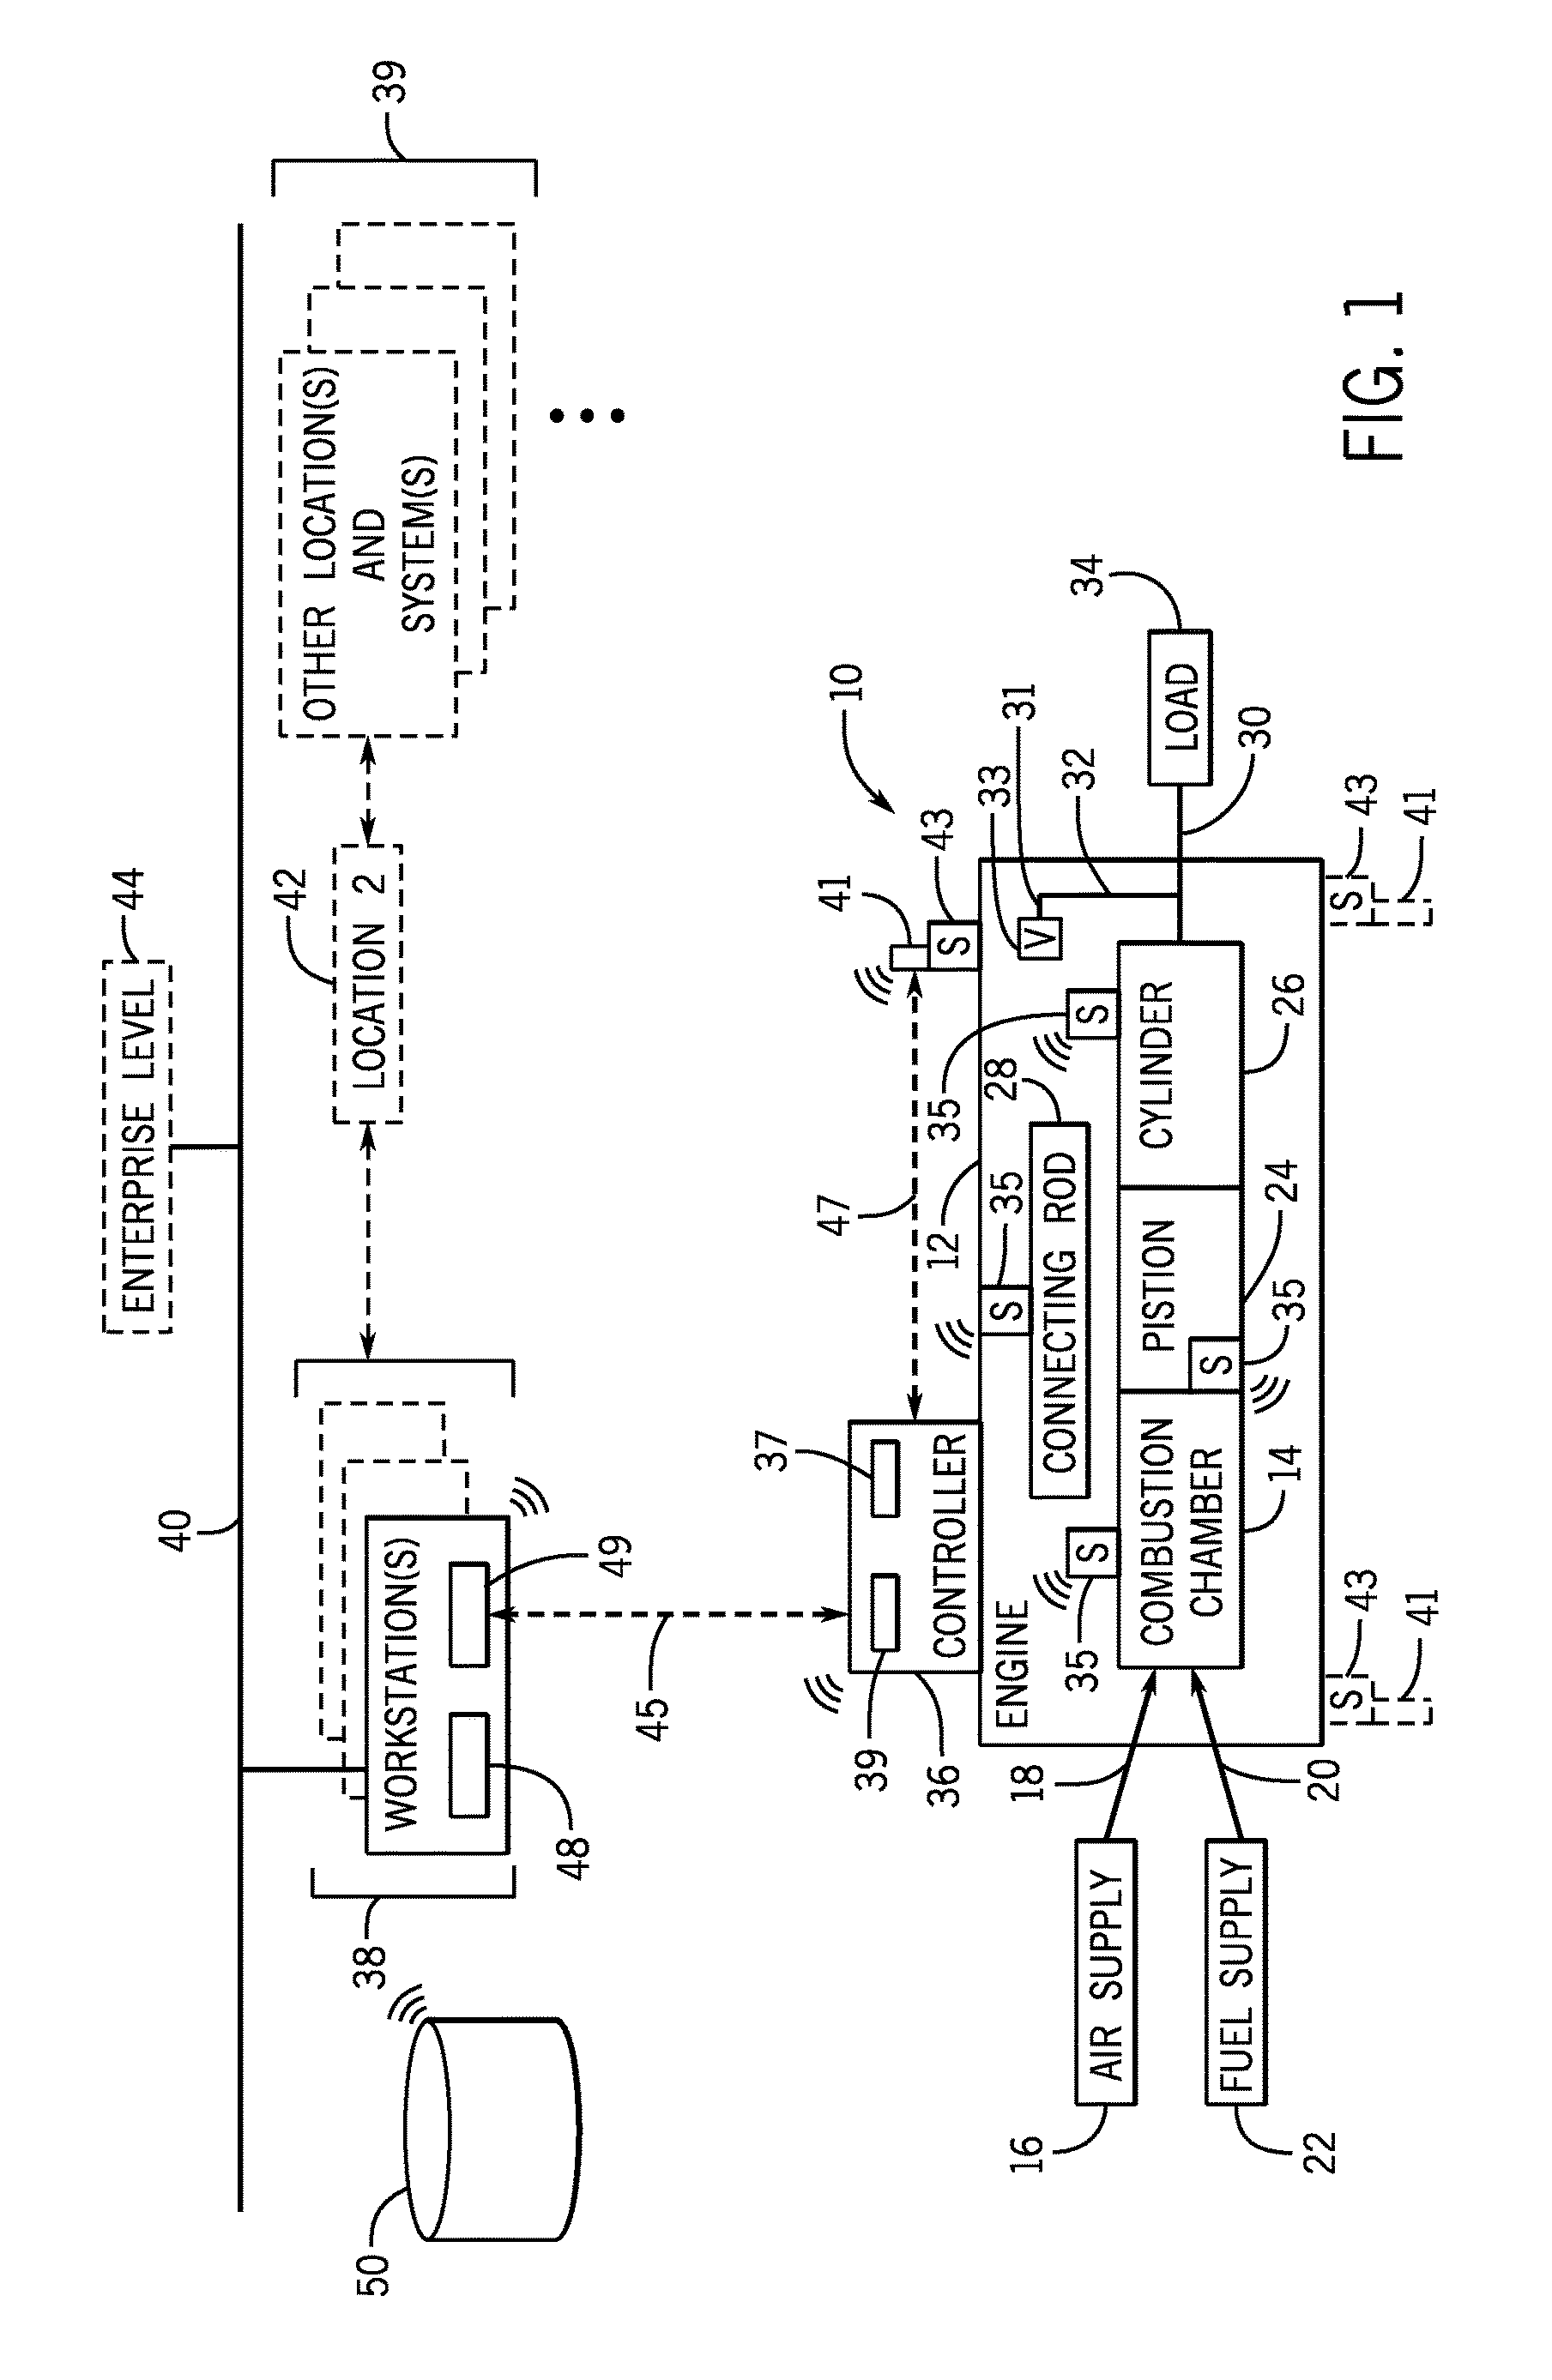 Method and system for portable engine health monitoring